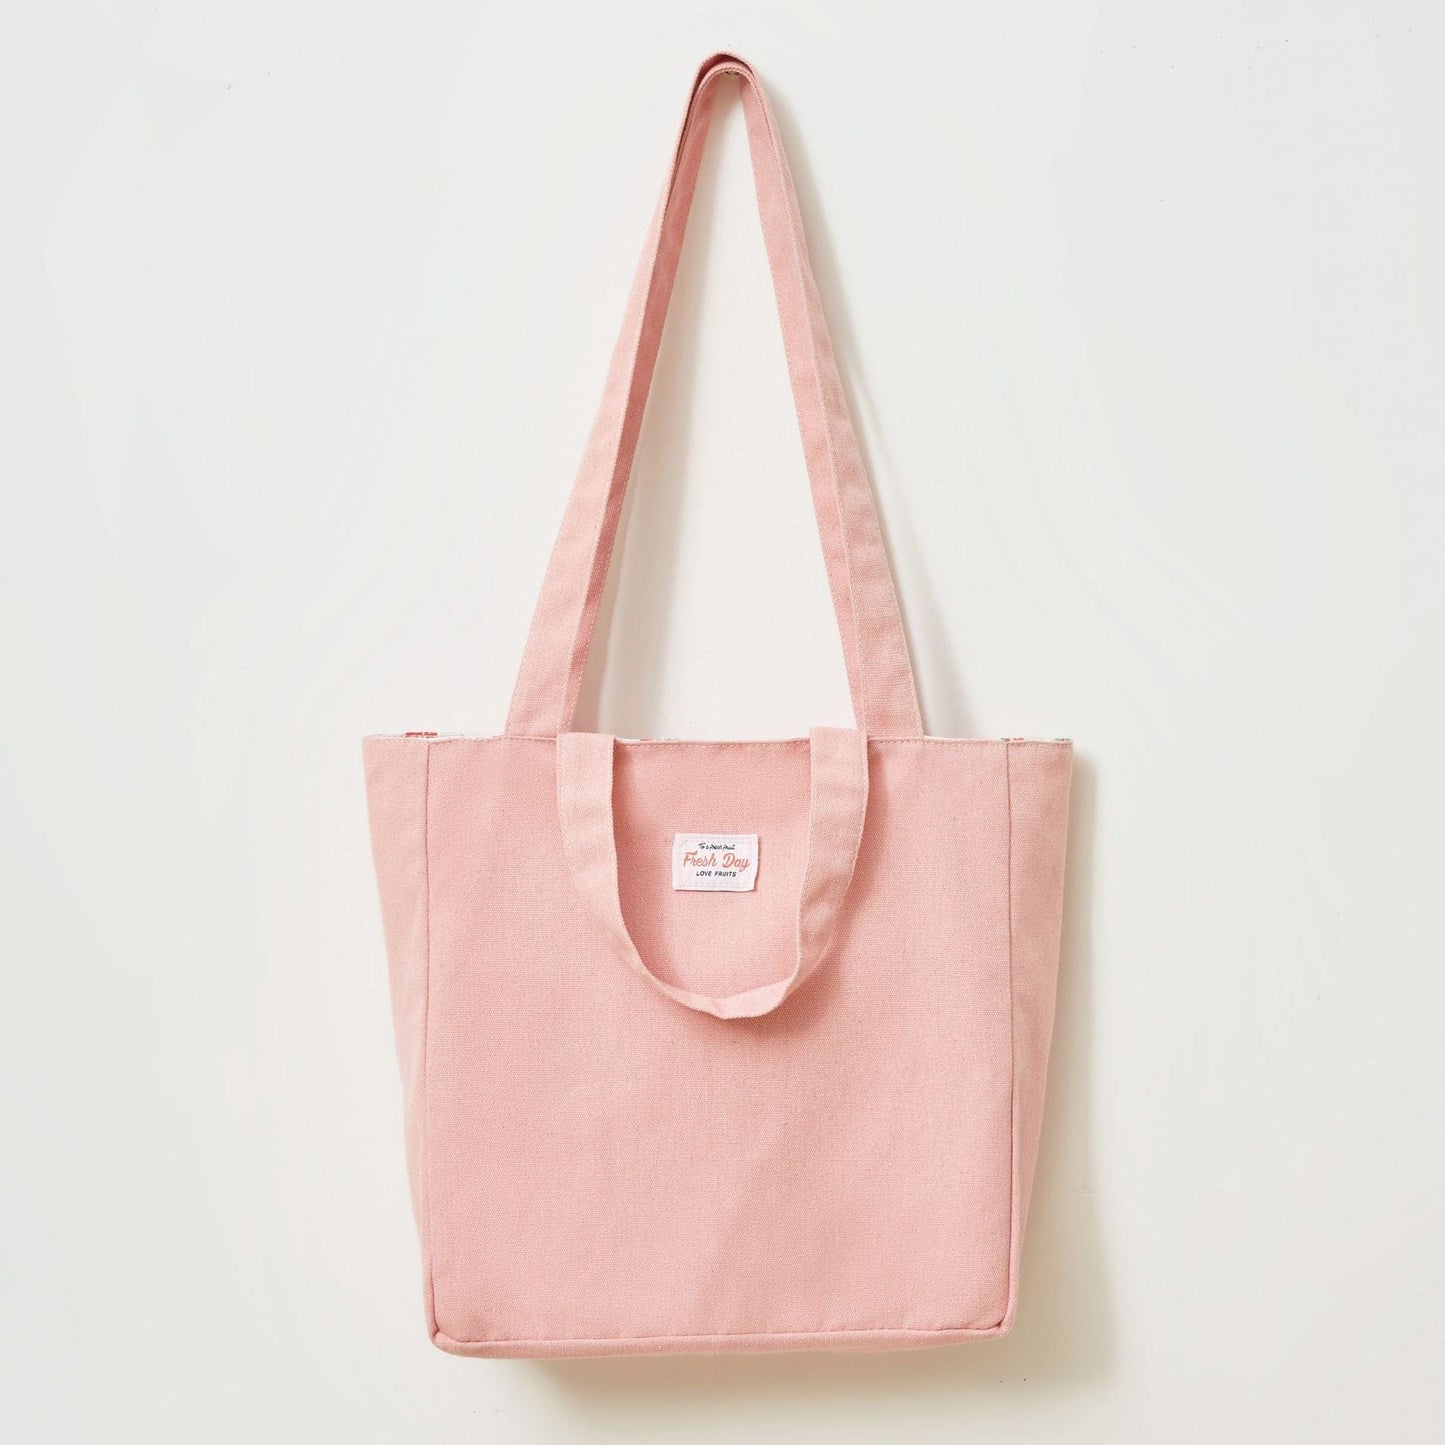 Tote Bag Tote Bag - Double Handle Two-Sided Fruit Canvas Shopping Bags